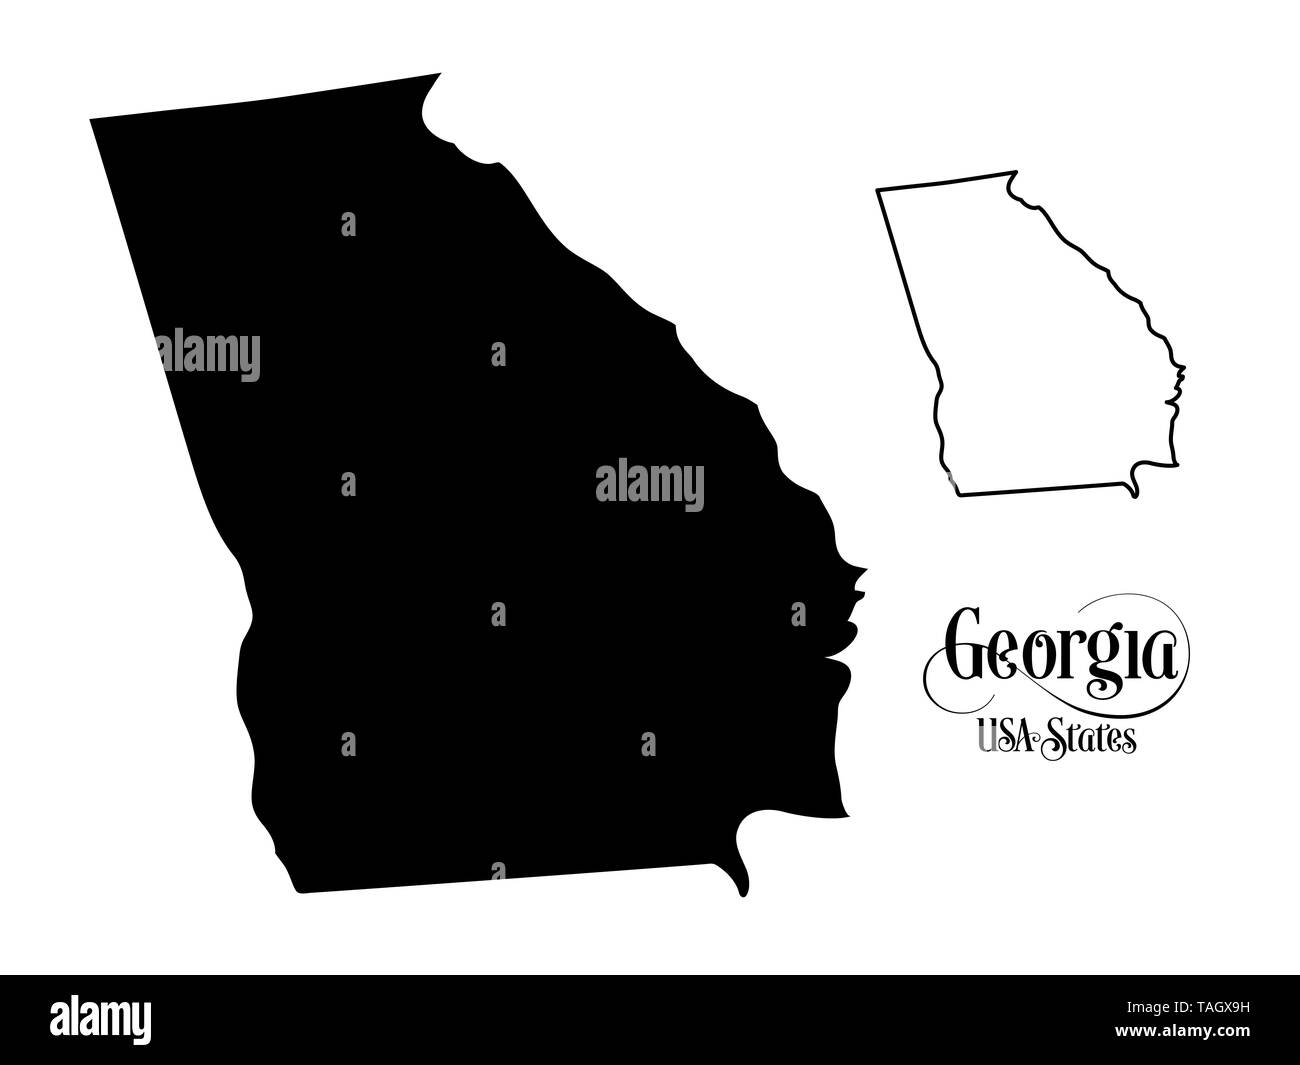 Map of The United States of America (USA) State of Georgia - Illustration on White Background. Stock Photo